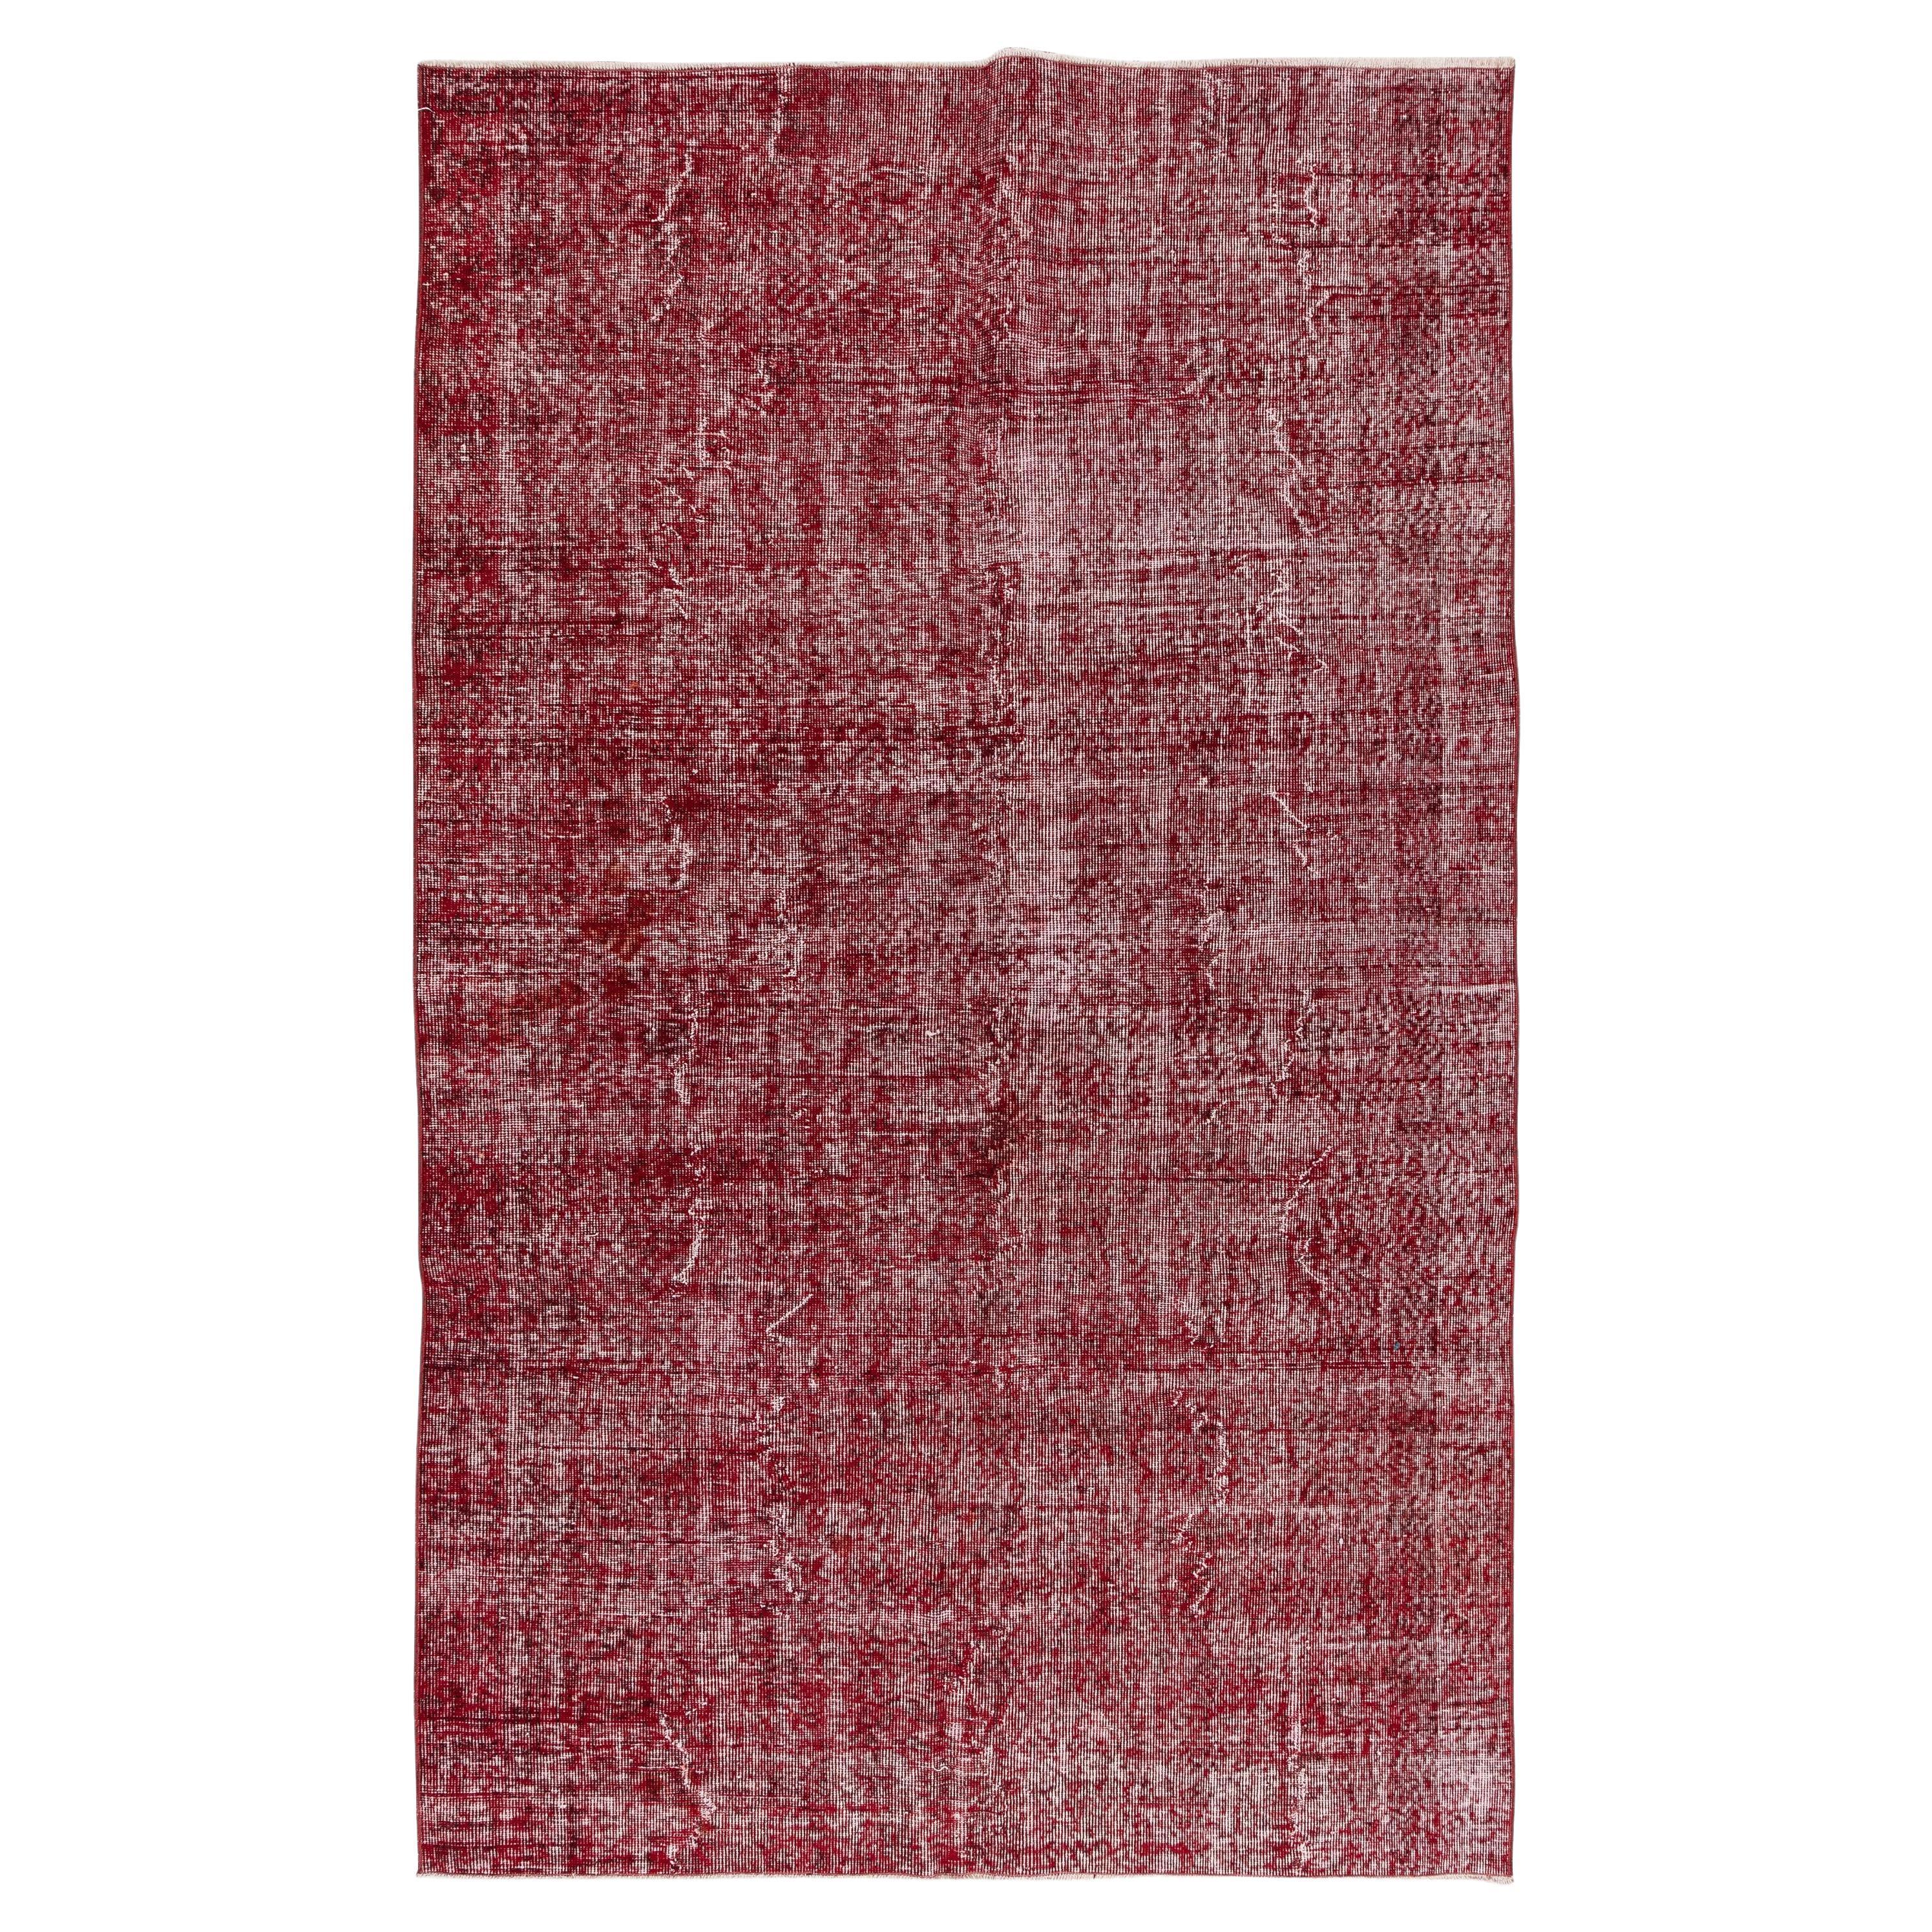 5.3x8.6 Ft Handmade MidCentury Turkish Rug in Plain Red for Modern Interiors For Sale